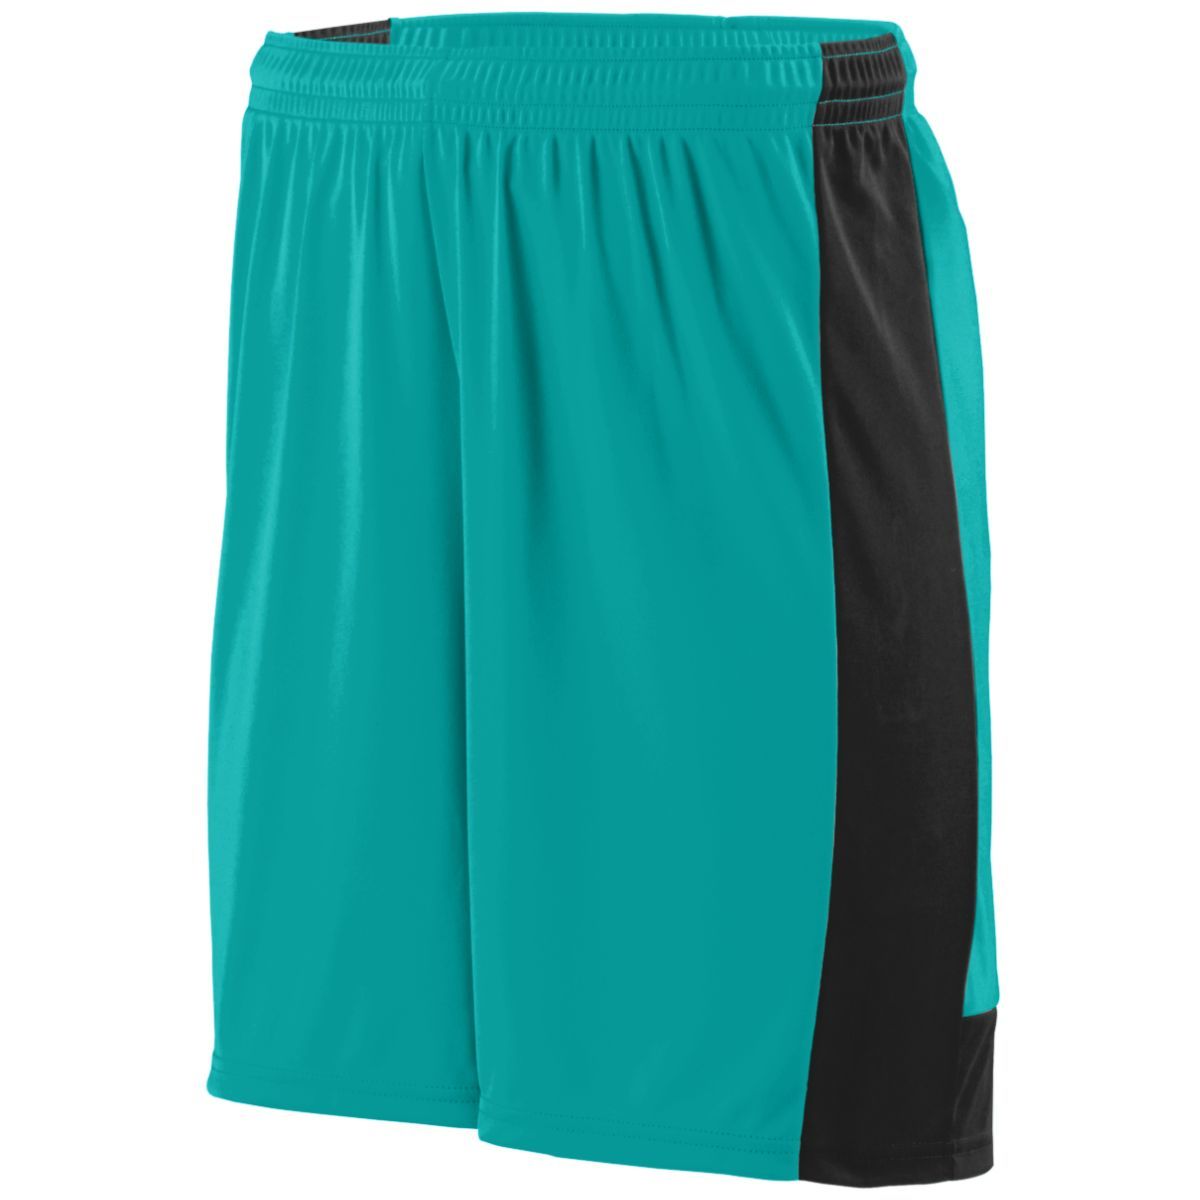 Augusta Sportswear Youth Lightning Shorts in Teal/Black  -Part of the Youth, Youth-Shorts, Augusta-Products, Soccer, All-Sports-1 product lines at KanaleyCreations.com